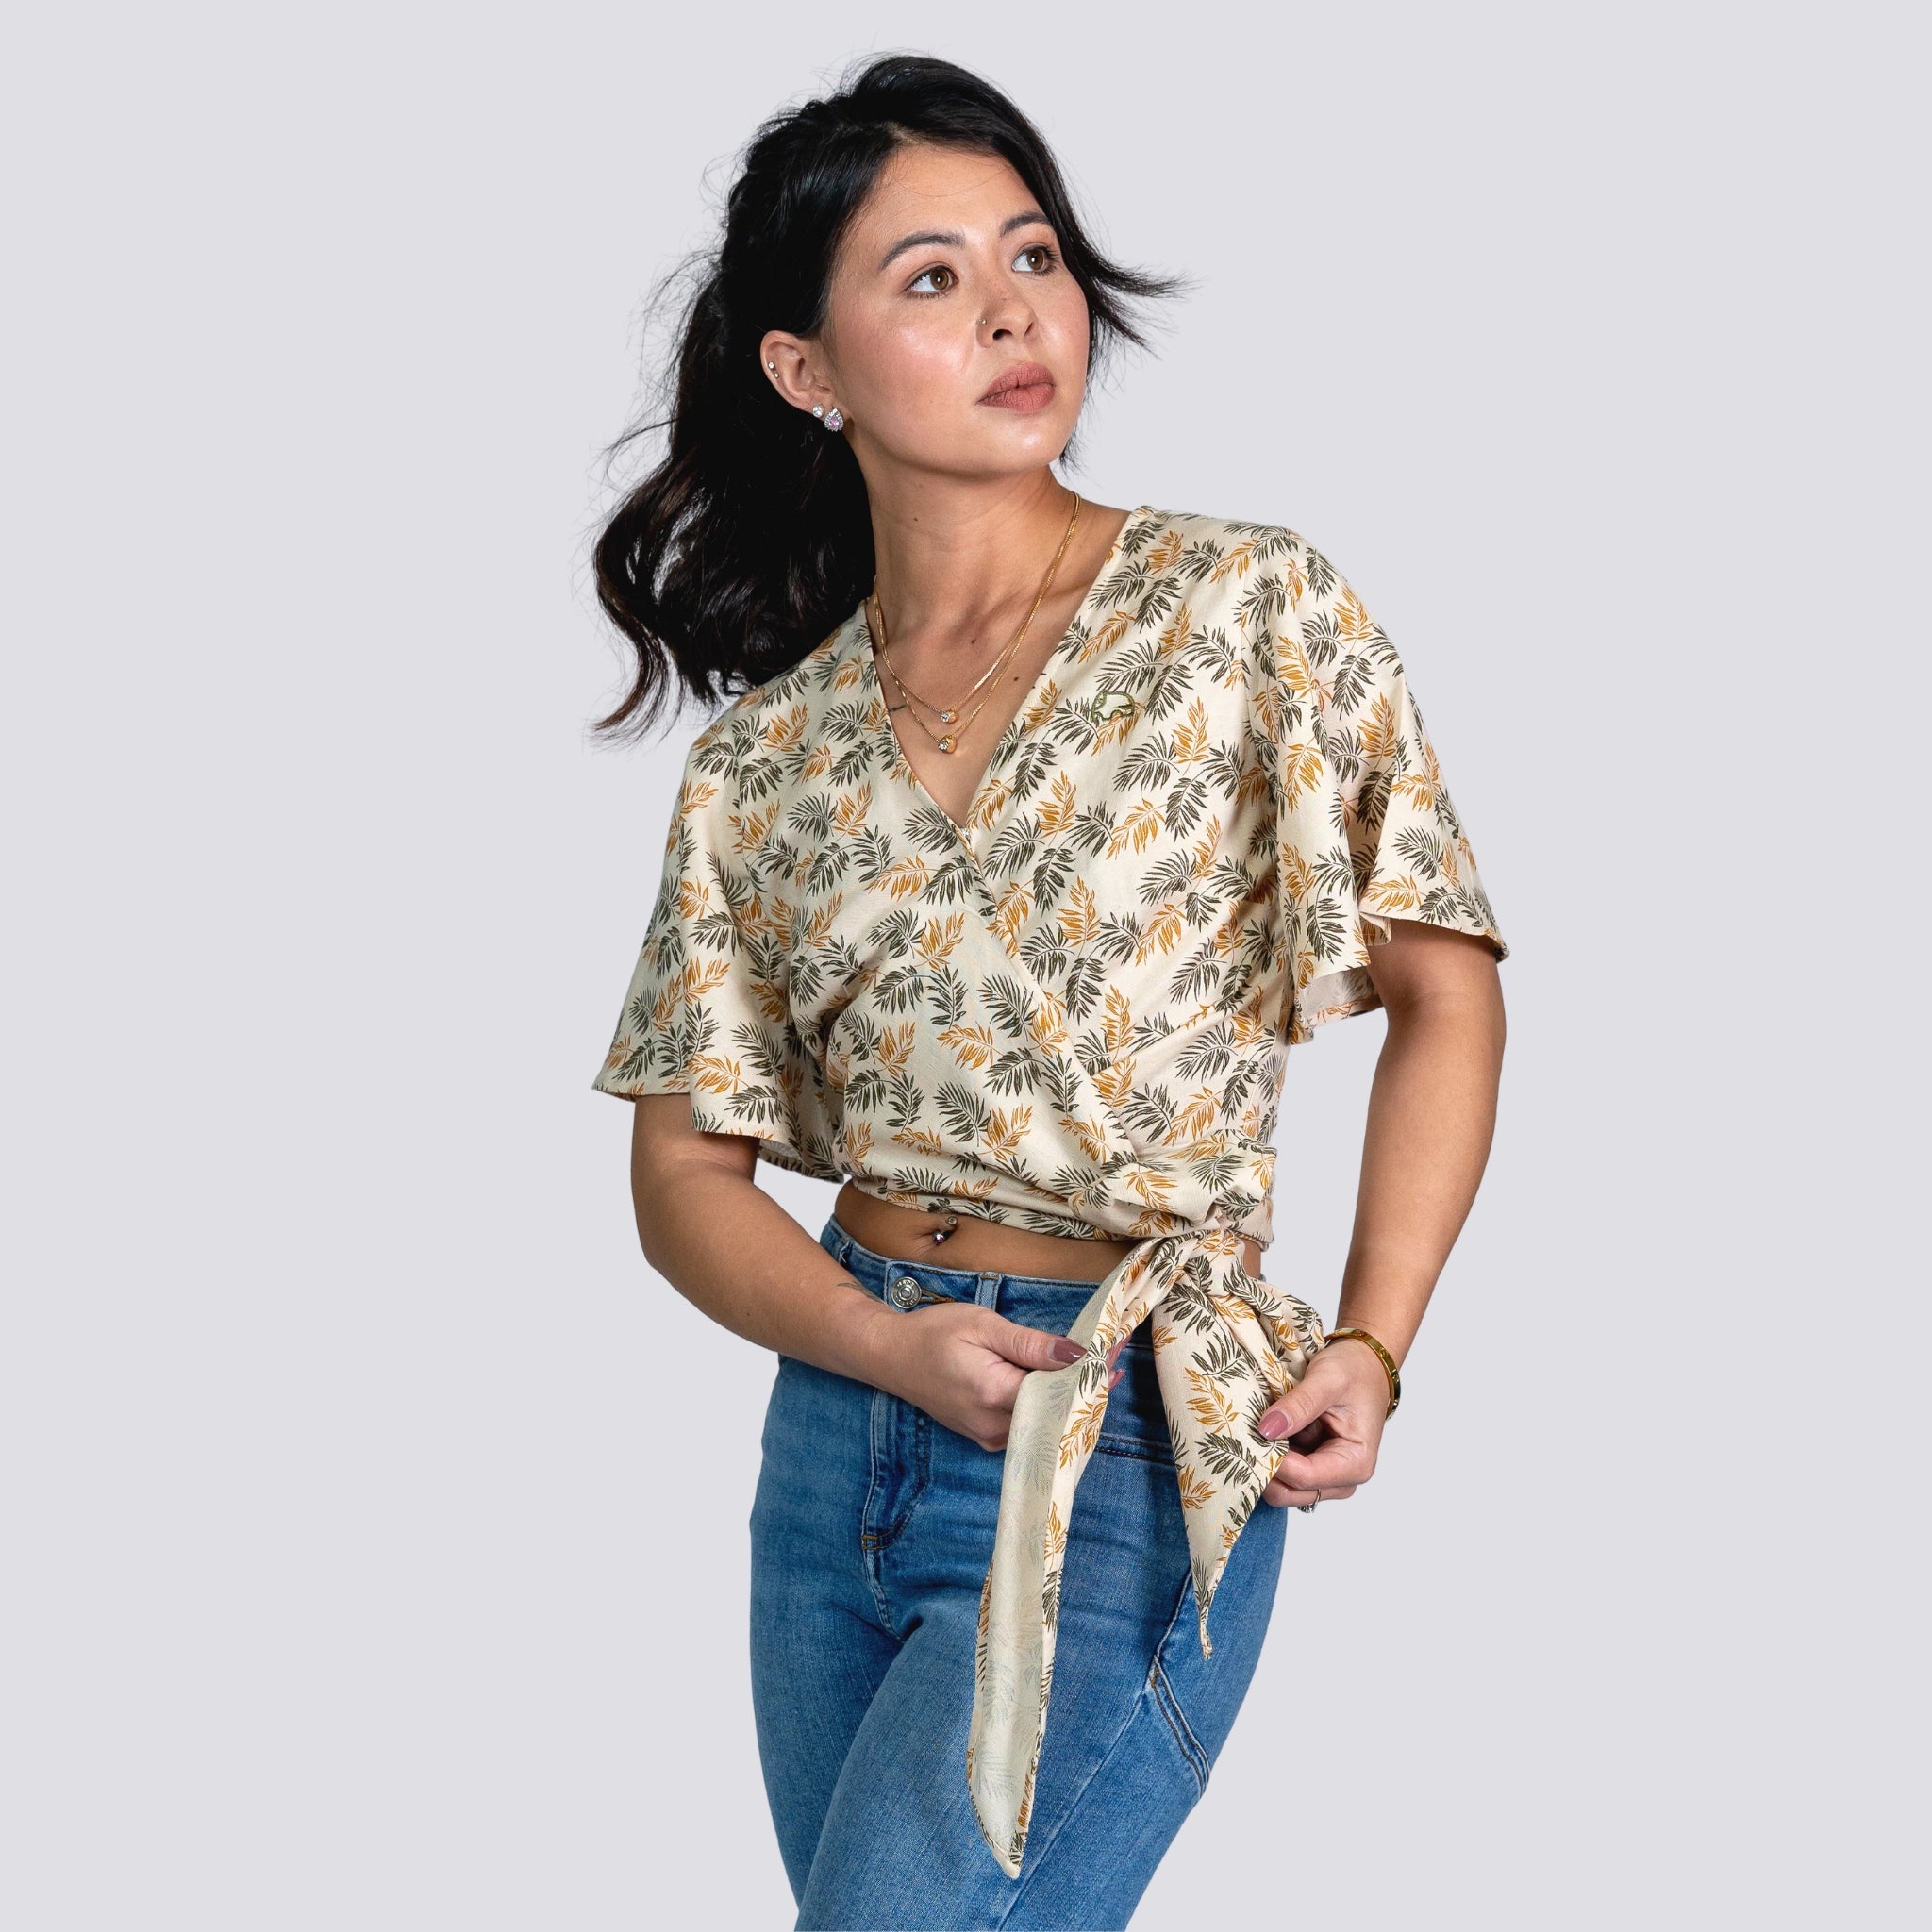 Woman in a ChicPalms Women's Eco-Friendly Wrap Top - Biscuit Bliss by Karee and jeans looking to the side against a gray background.